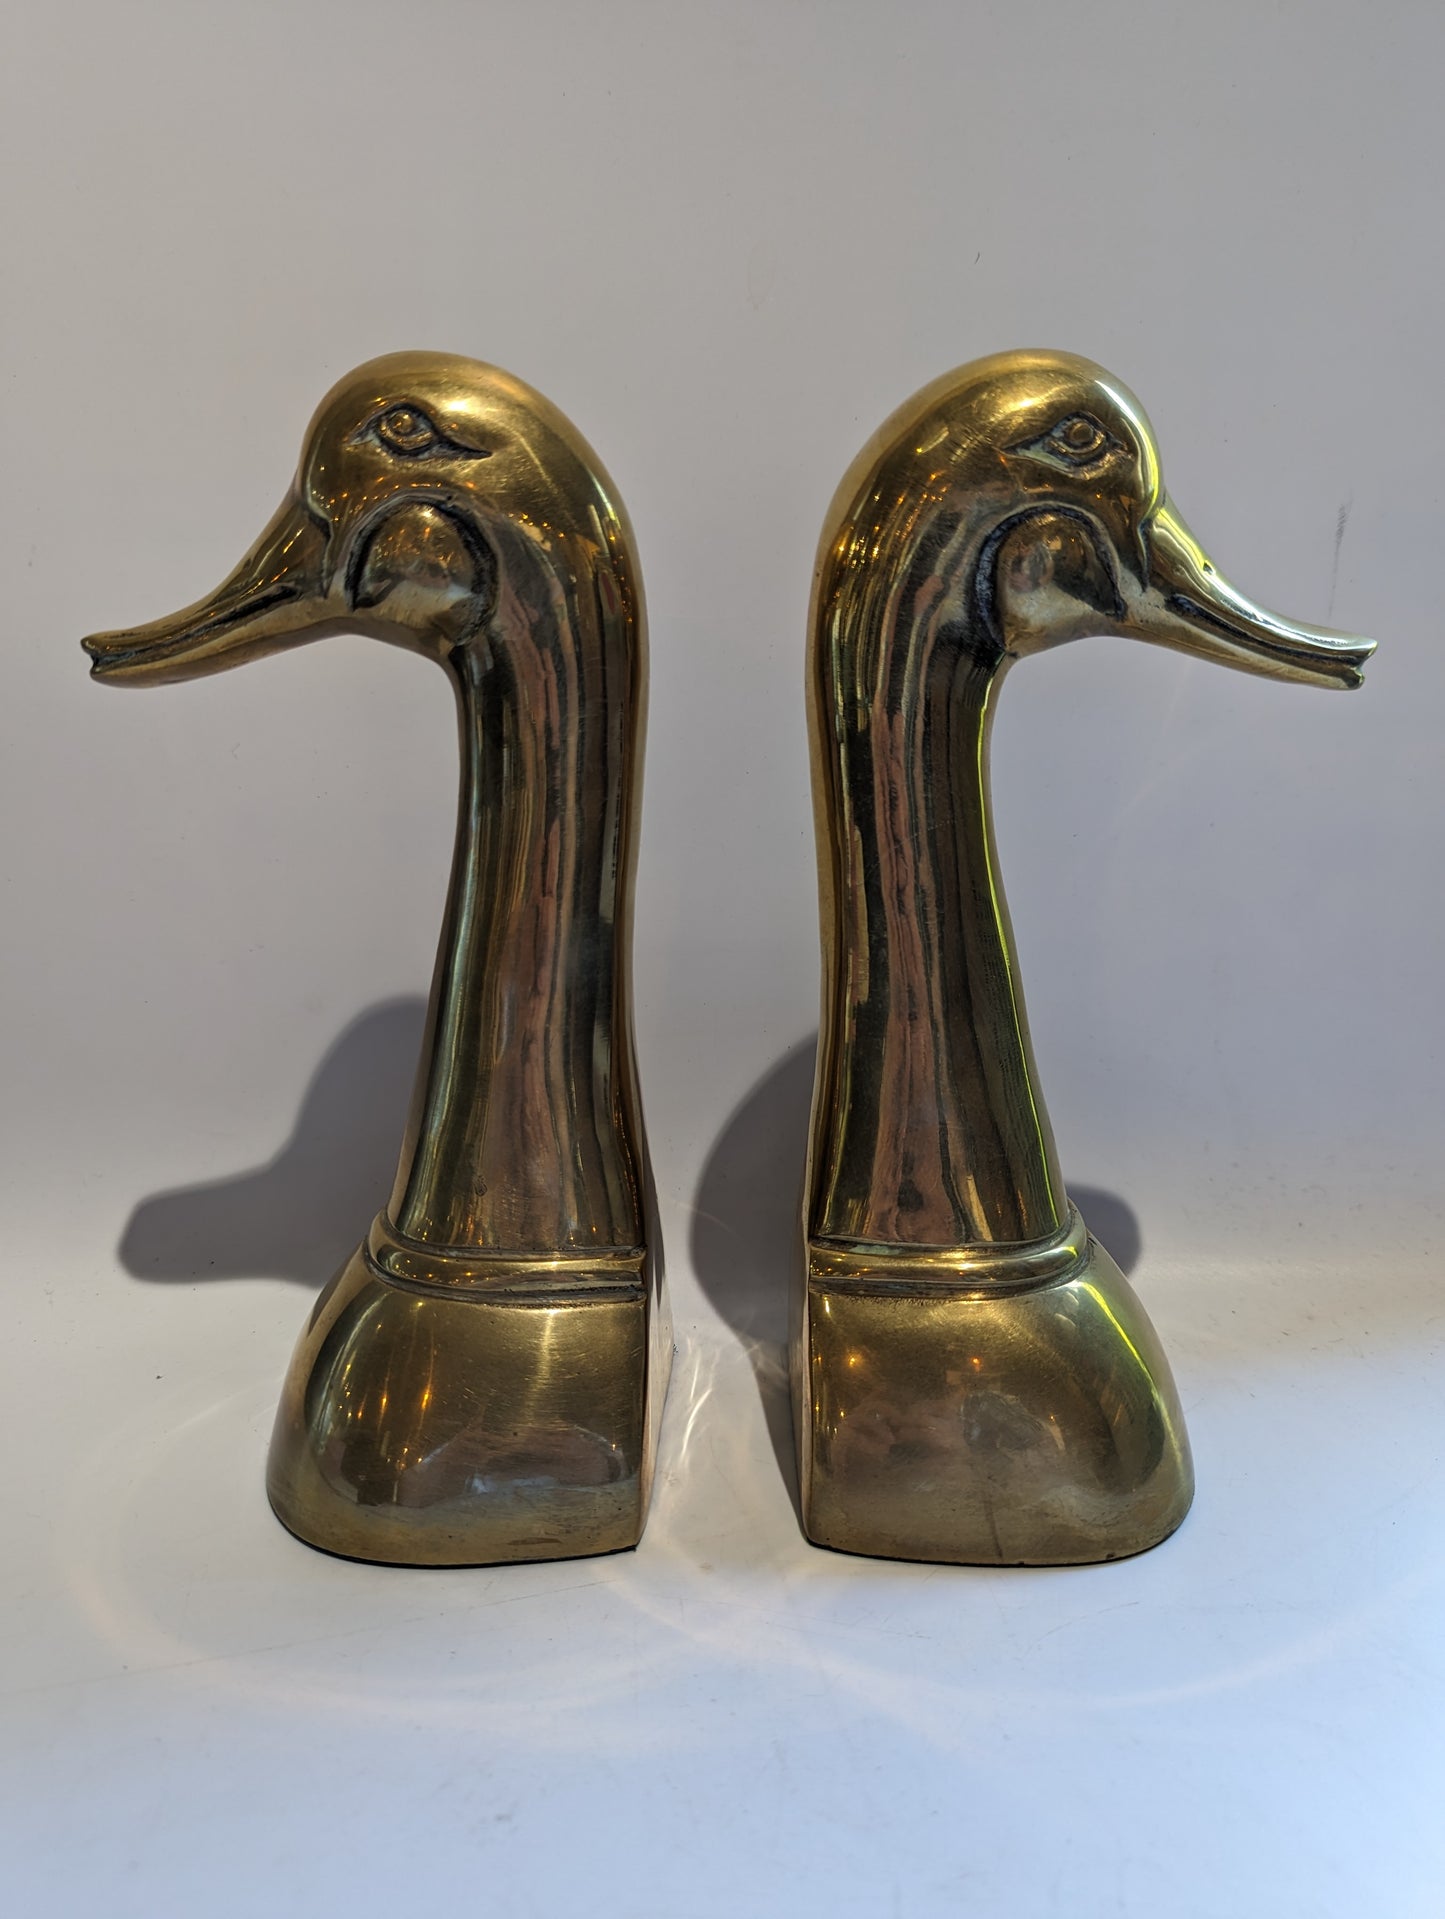 Vintage Gatco Solid Brass Duck Head Bookends 9.5 x 4.5